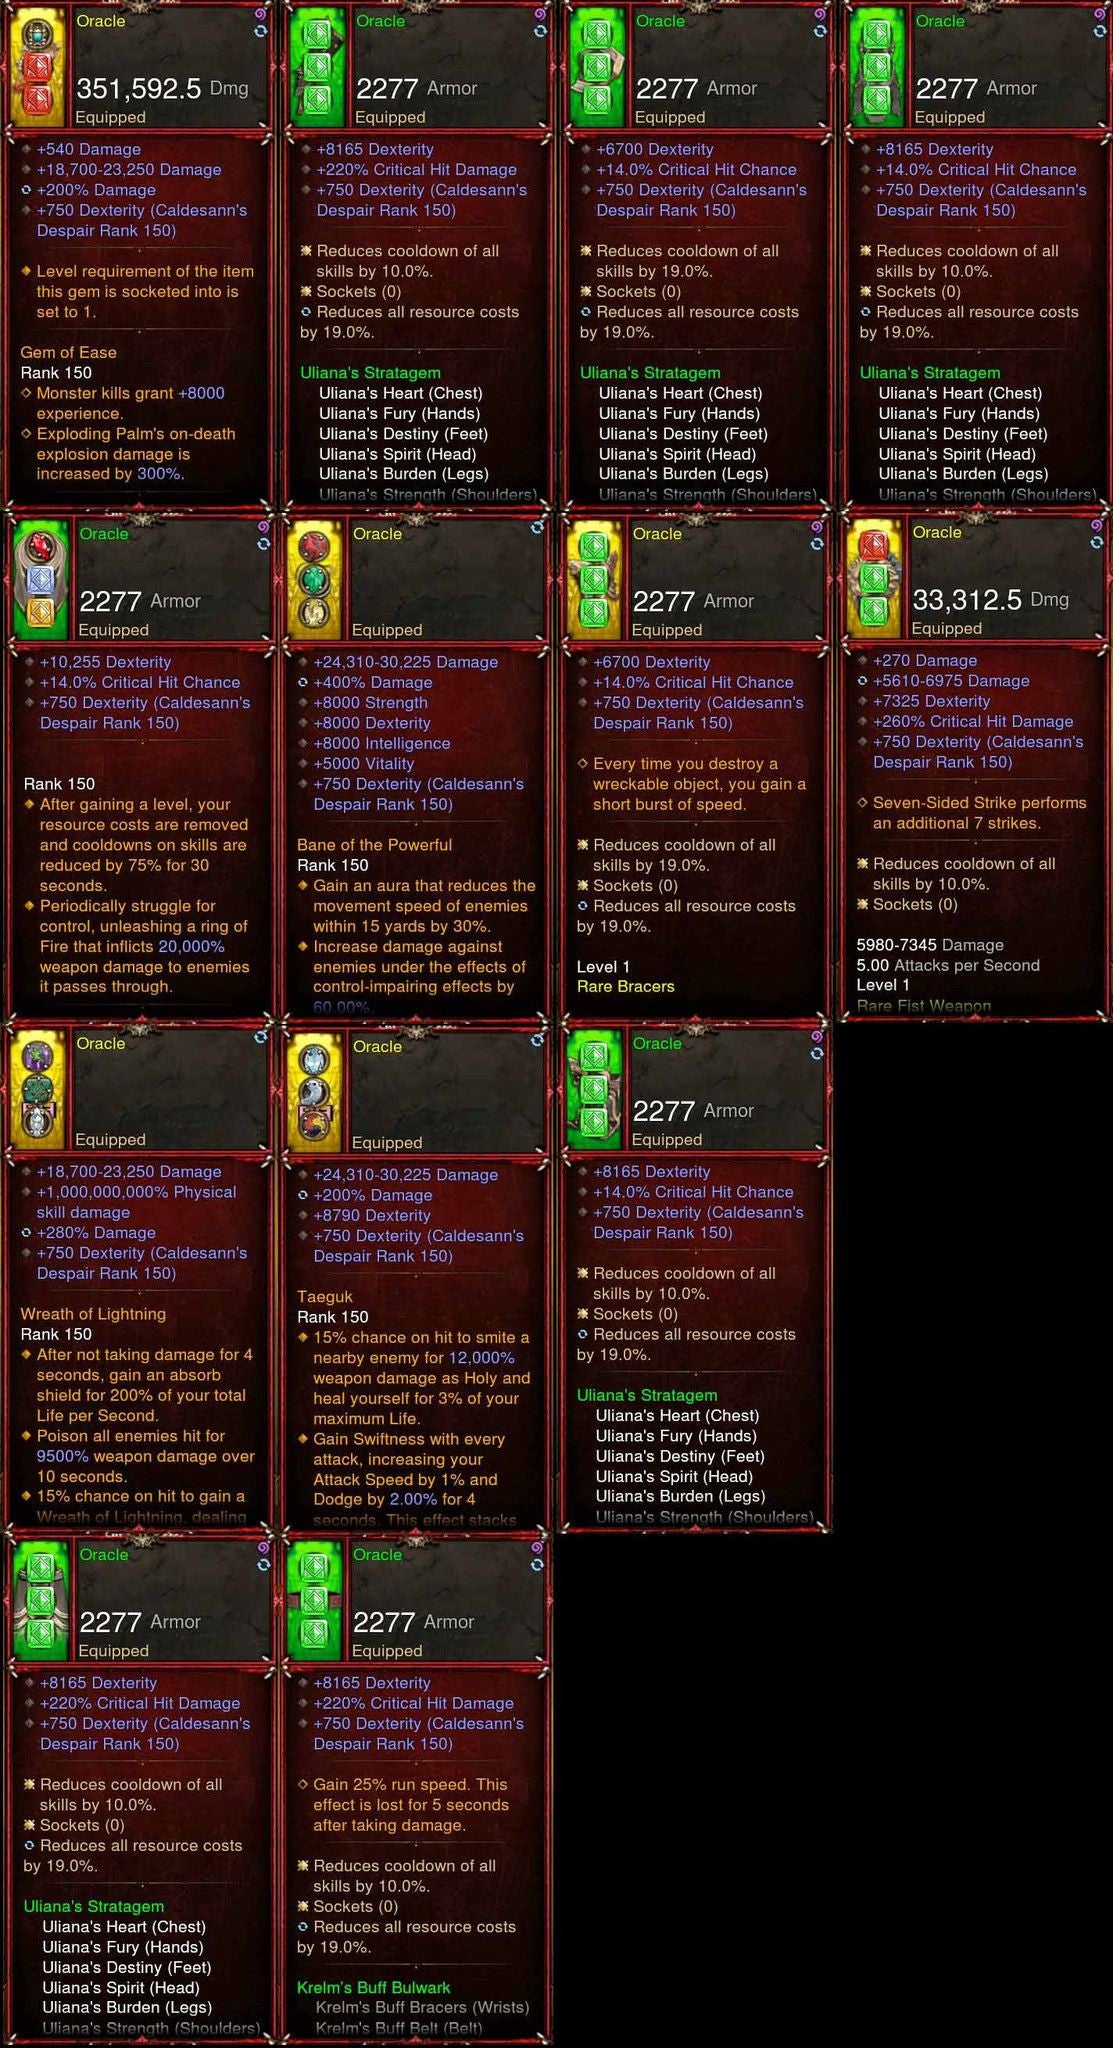 [Primal Ancient] Diablo 3 Immortal v3 Ulania Monk Oracle Level 1-70 Diablo 3 Mods ROS Seasonal and Non Seasonal Save Mod - Modded Items and Gear - Hacks - Cheats - Trainers for Playstation 4 - Playstation 5 - Nintendo Switch - Xbox One